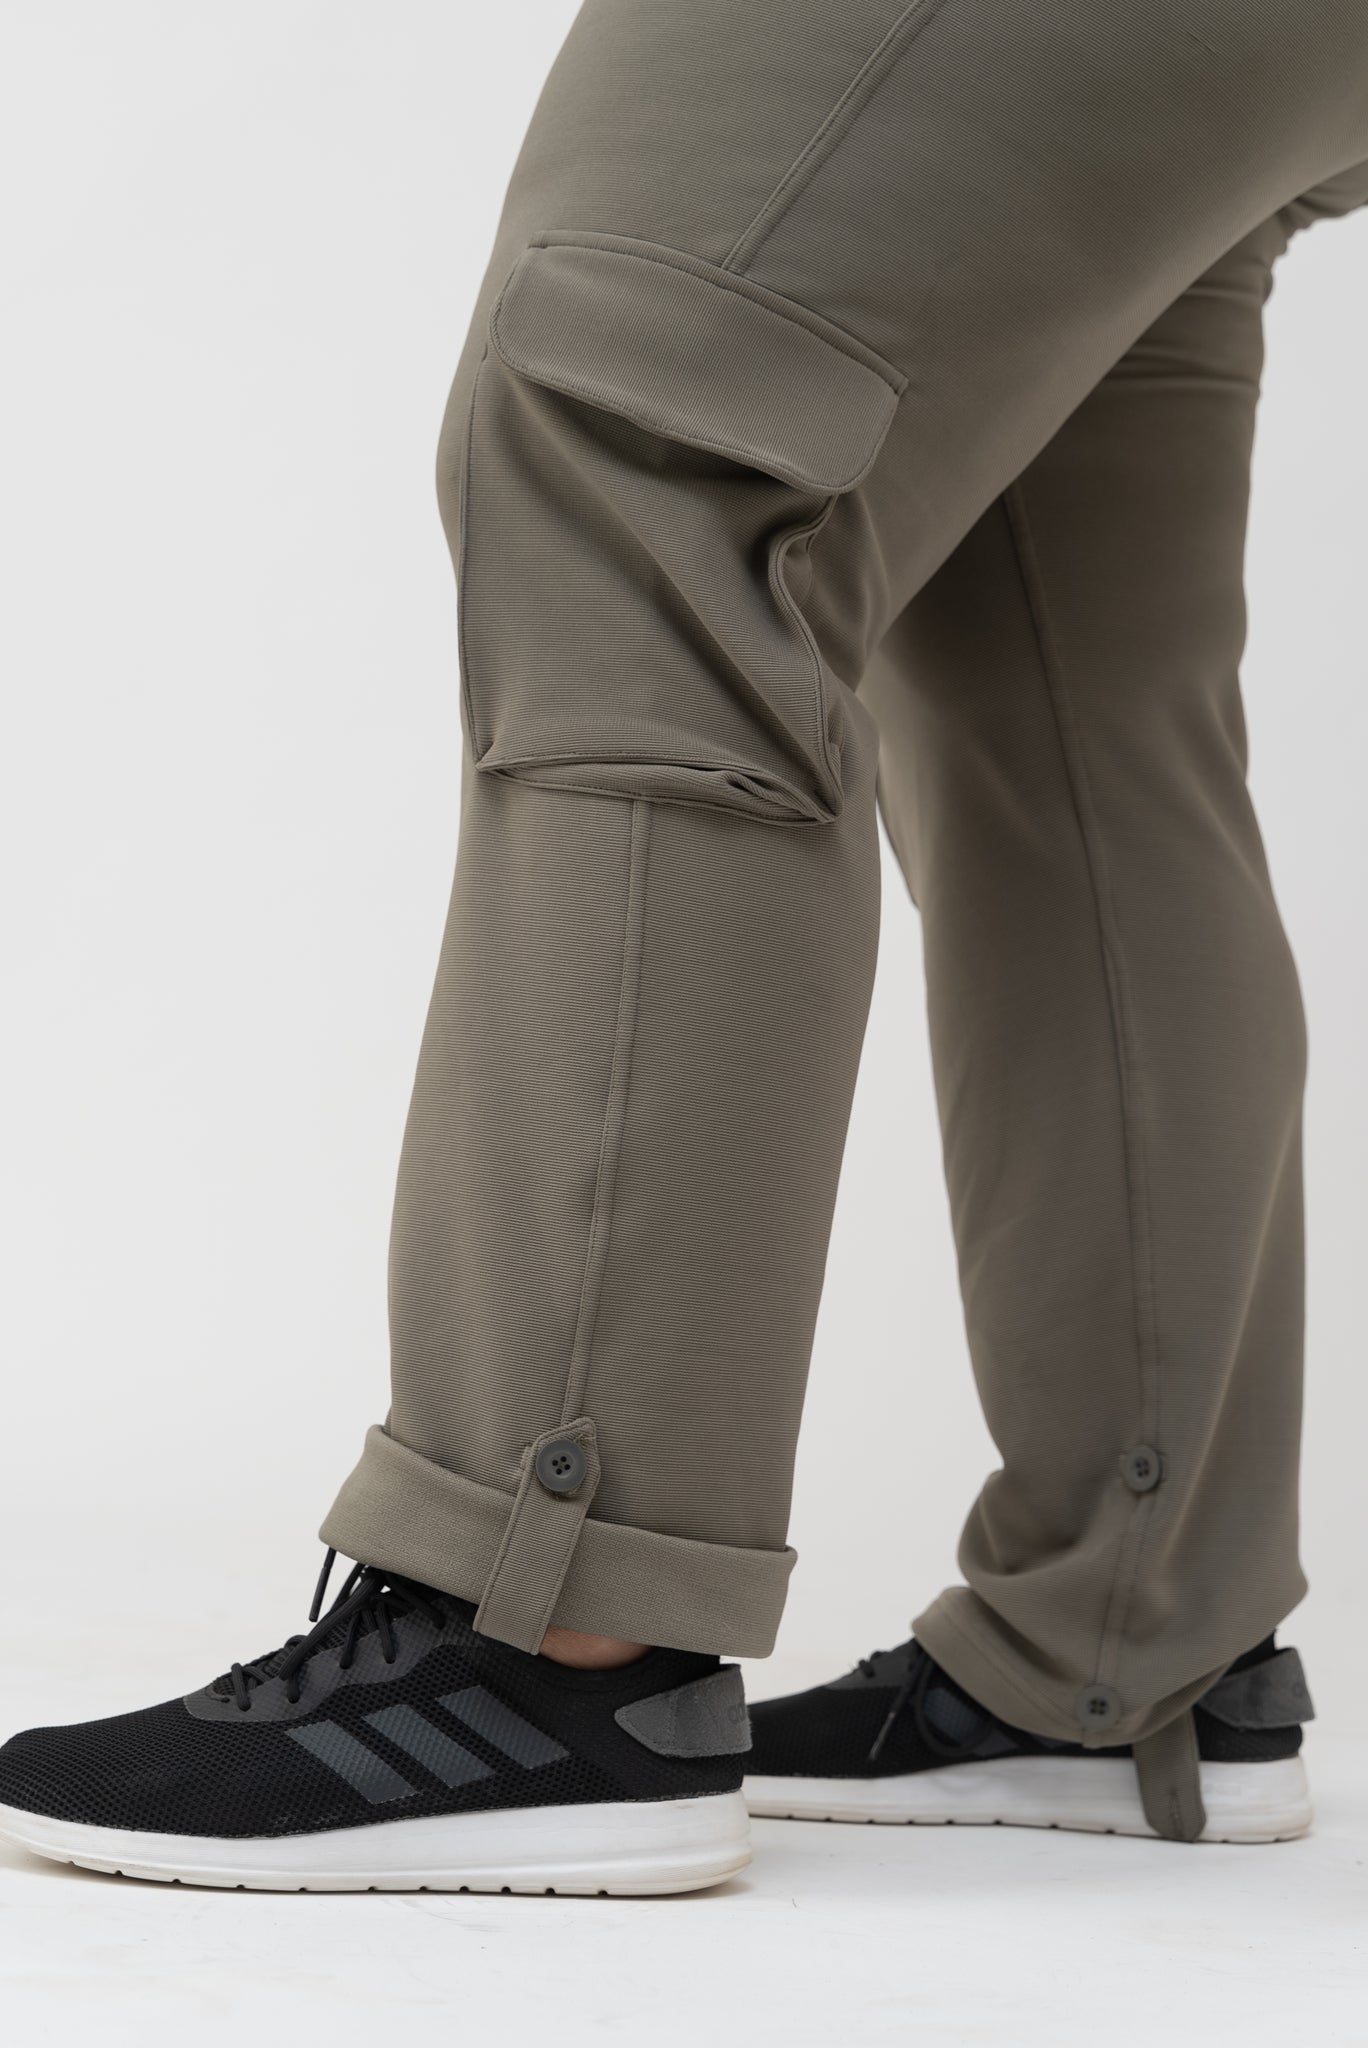 All Star Cargo Pants: Olive